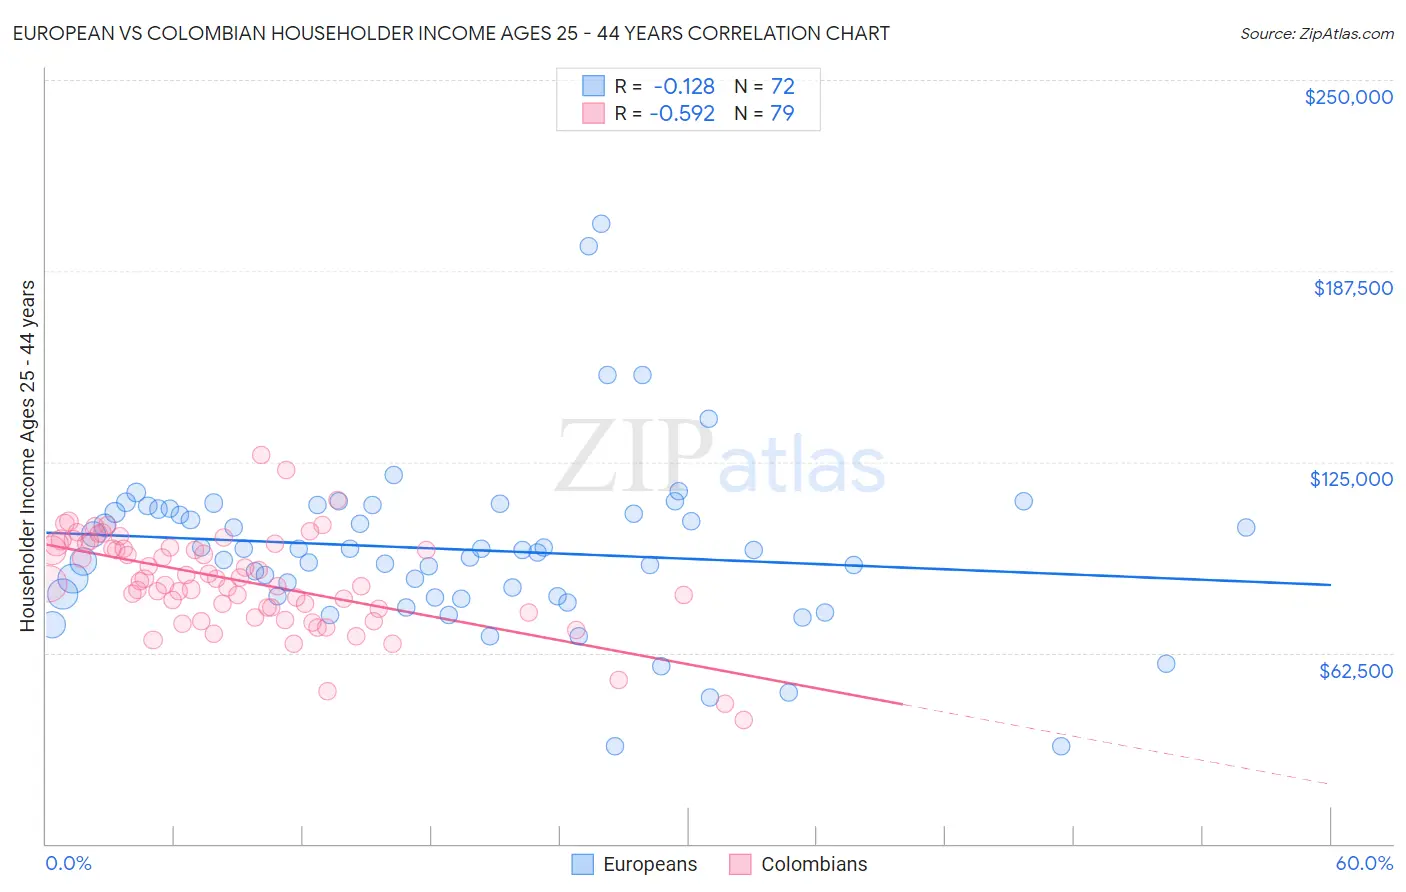 European vs Colombian Householder Income Ages 25 - 44 years